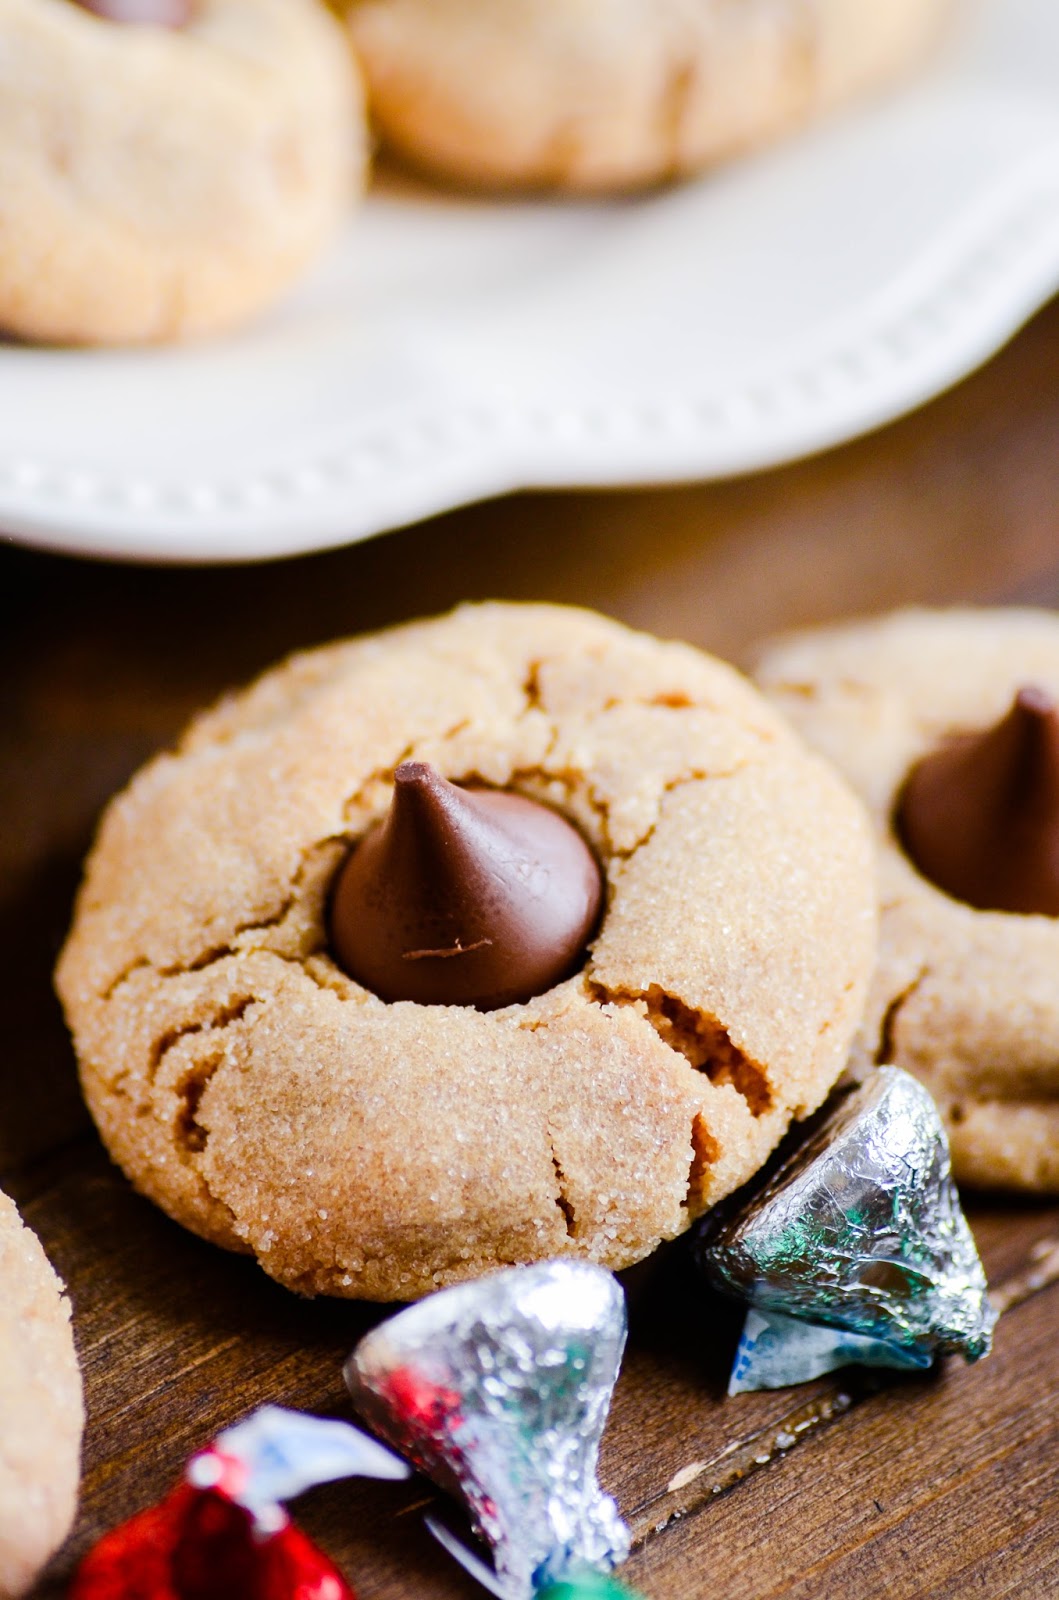 Made with 4 simple ingredients, these peanut butter blossoms are the perfect addition to your holiday cookie plate!